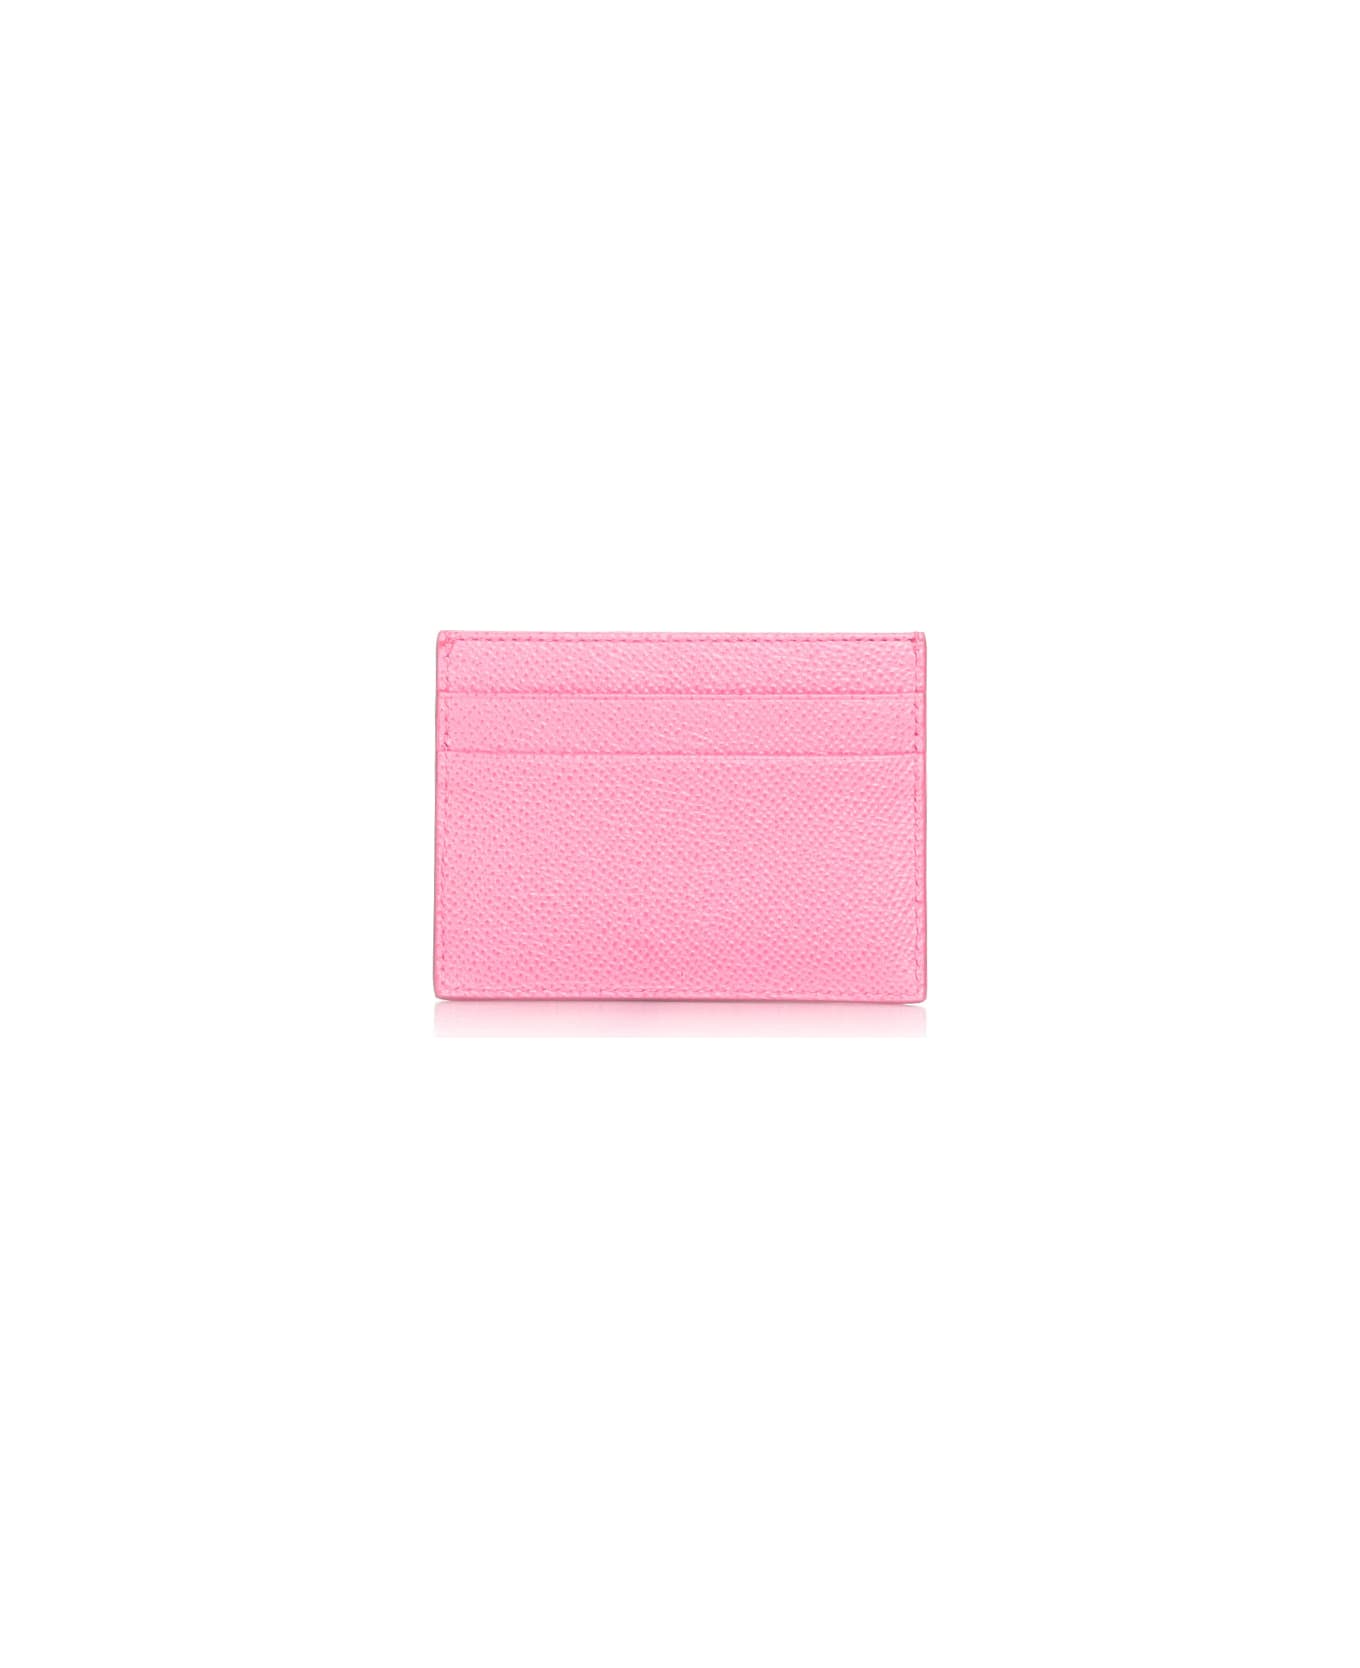 Dolce & Gabbana Credit Card Holder With Tag - CICLAMINO2